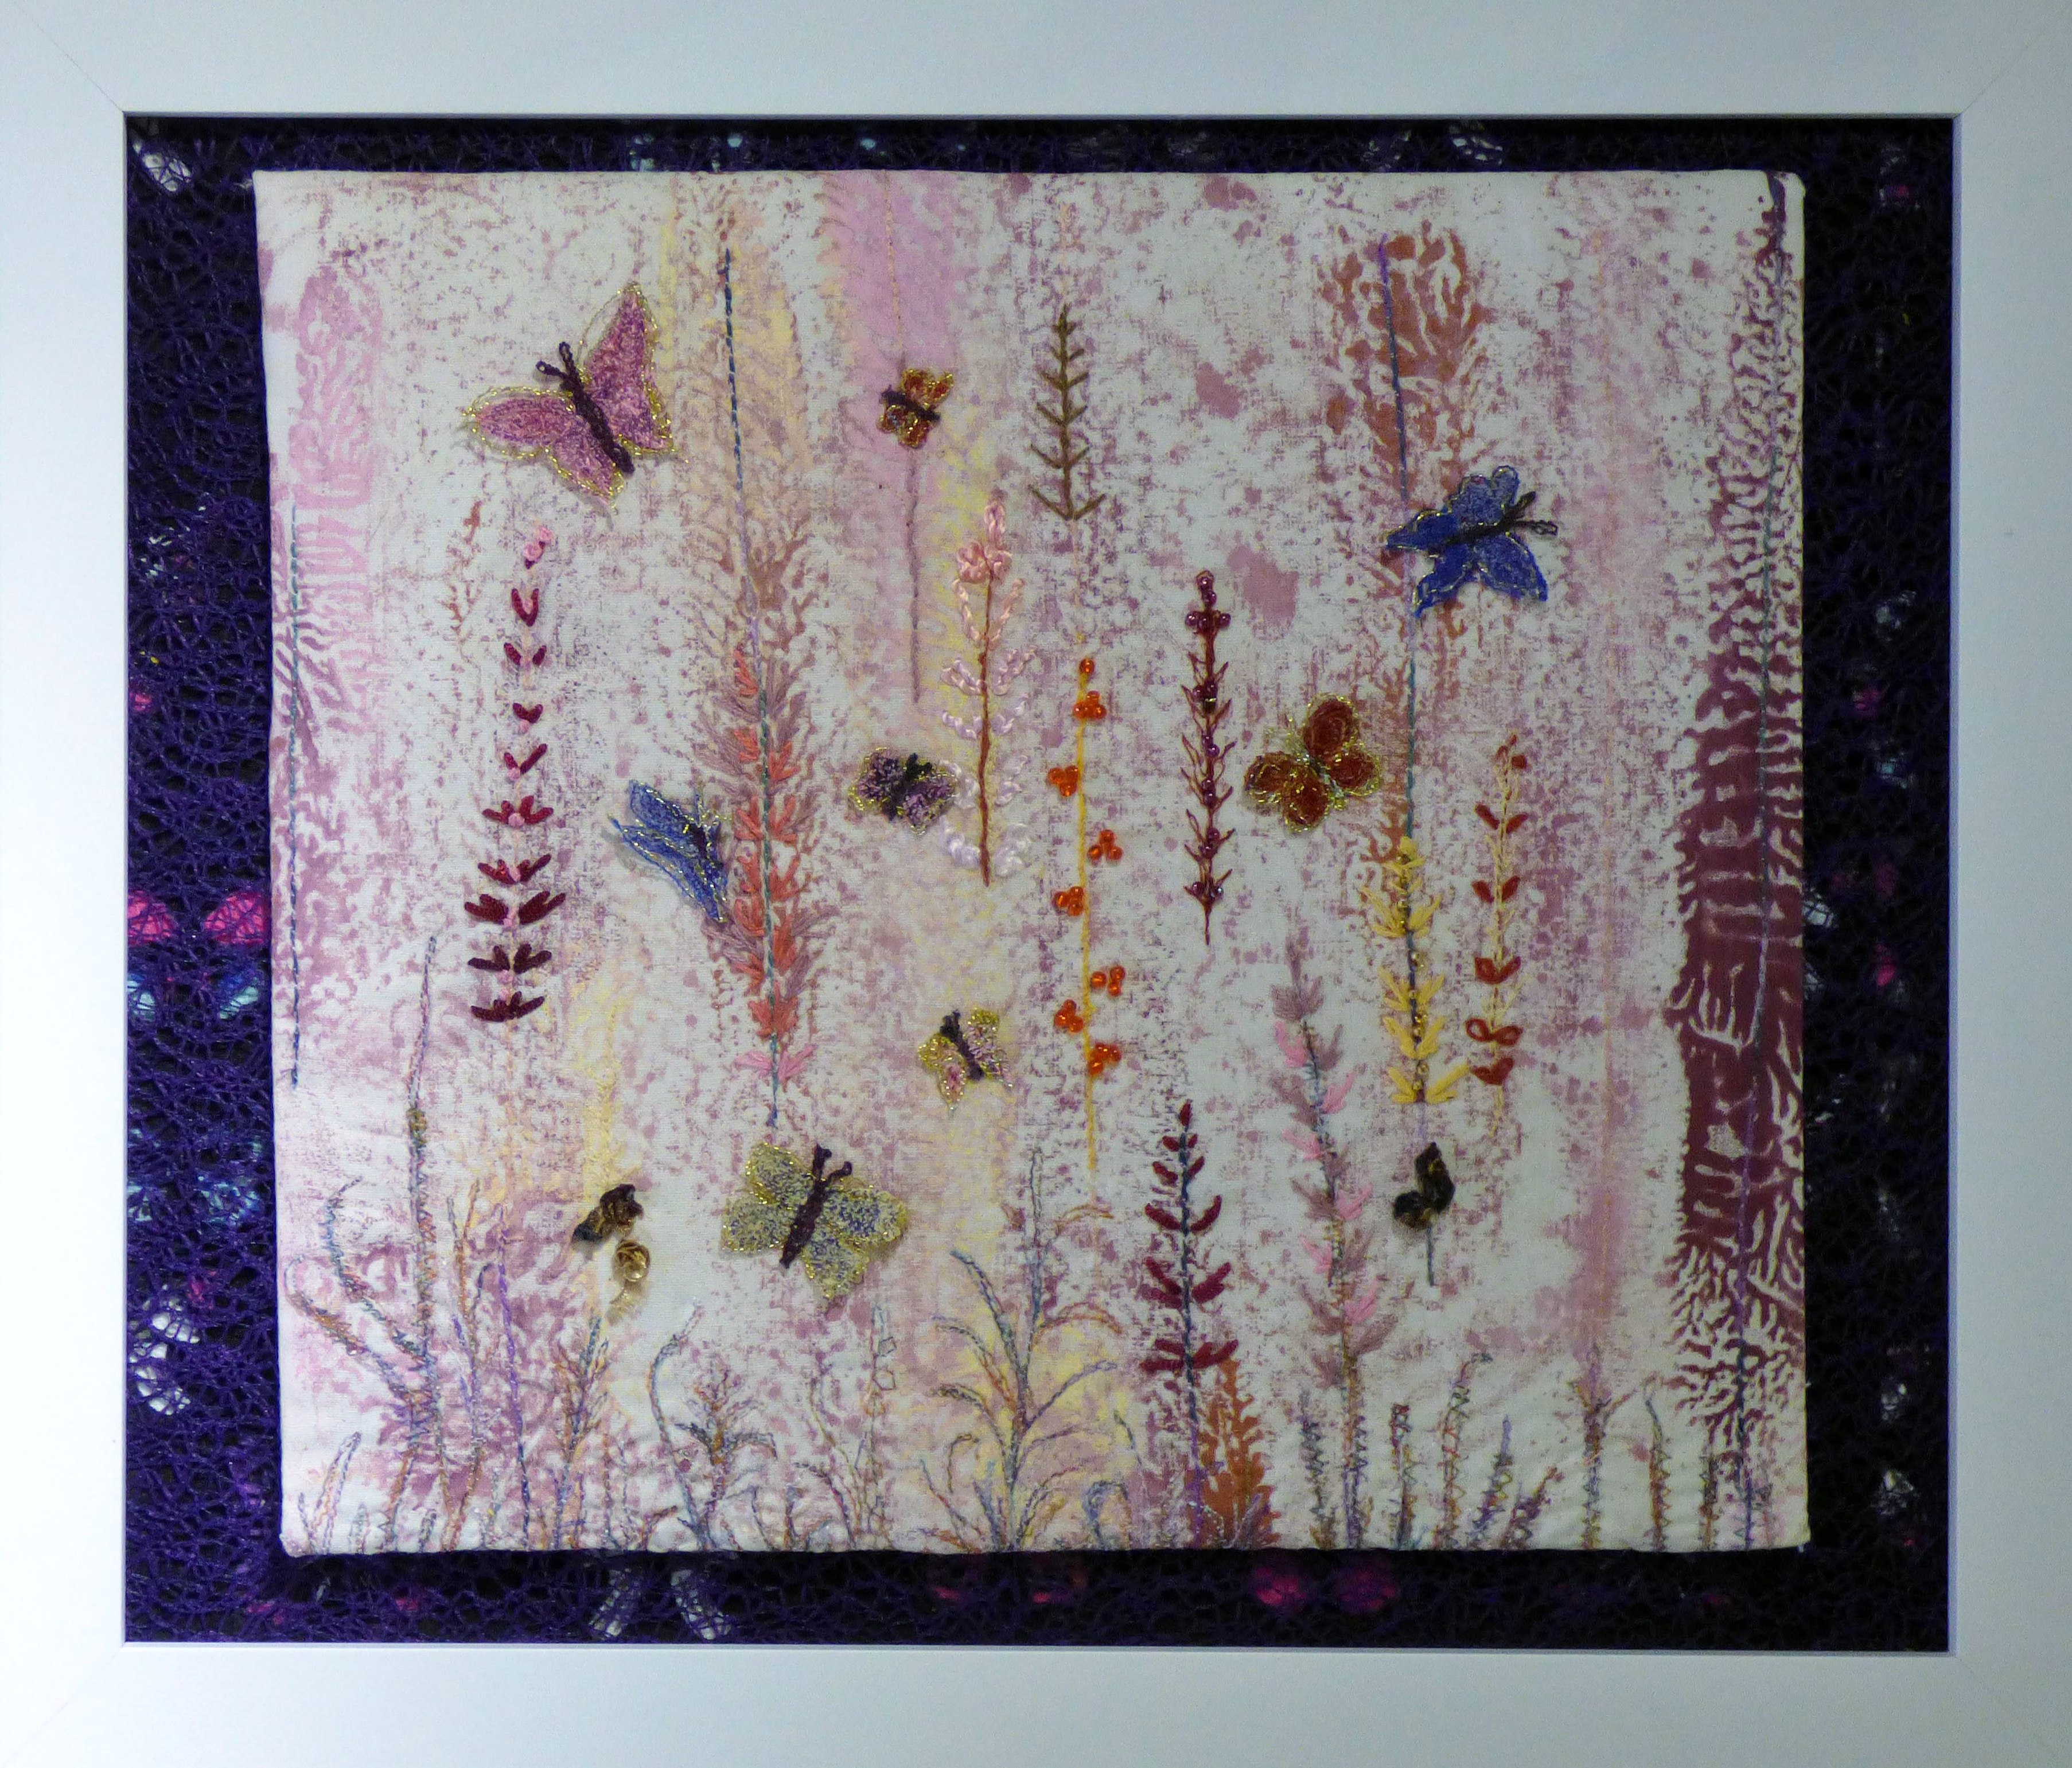 LITTLE BUTTERFLIES by Audrey Tweed, N.Wales EG, hand & free machine embroidery on mono printed cotton